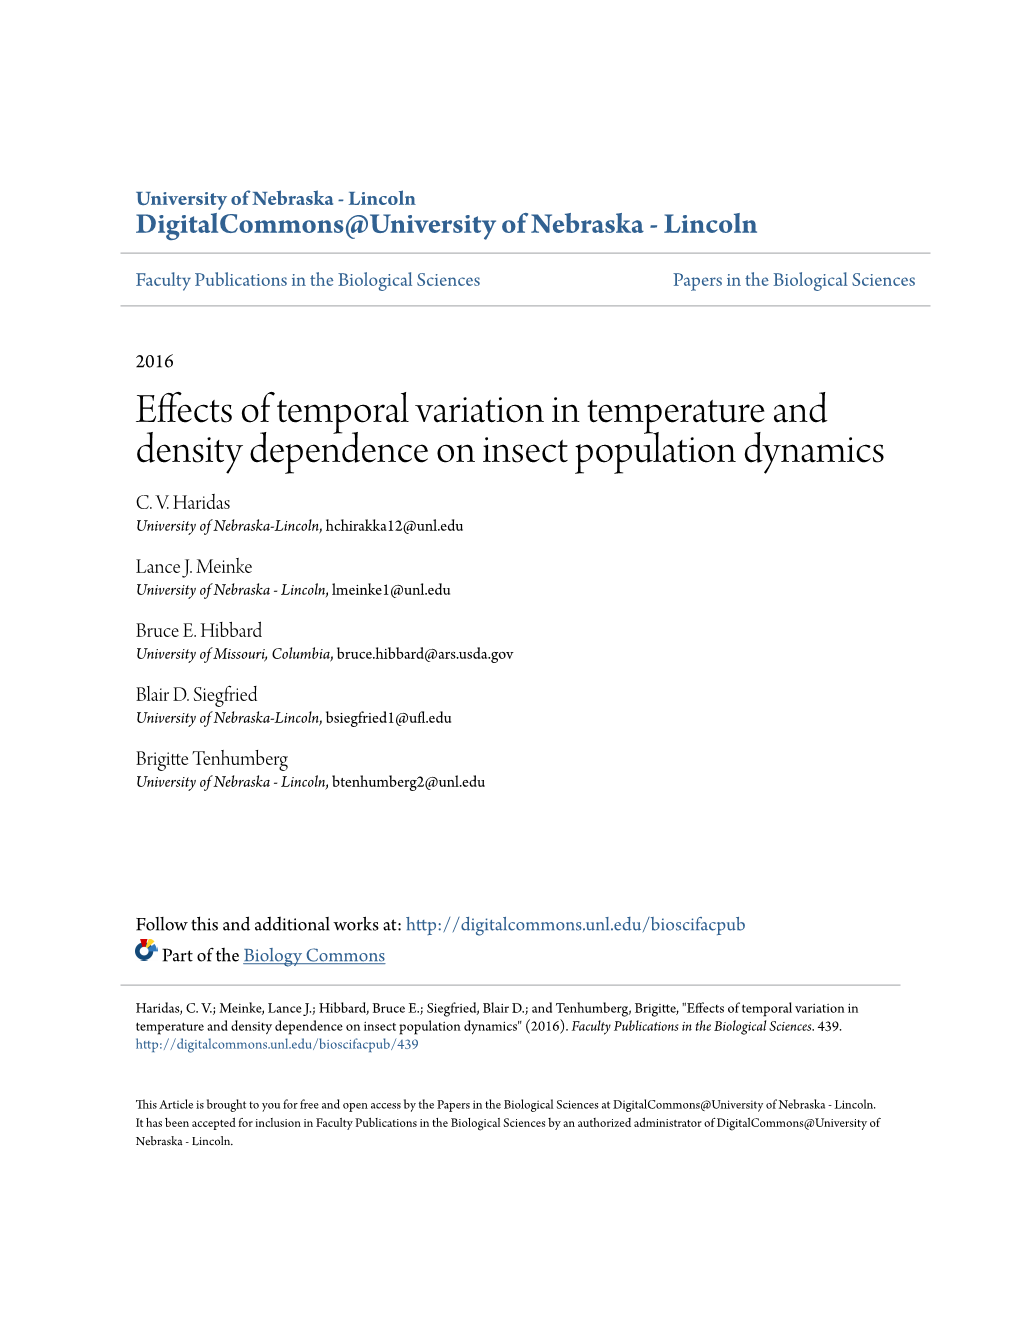 Effects of Temporal Variation in Temperature and Density Dependence on Insect Population Dynamics C